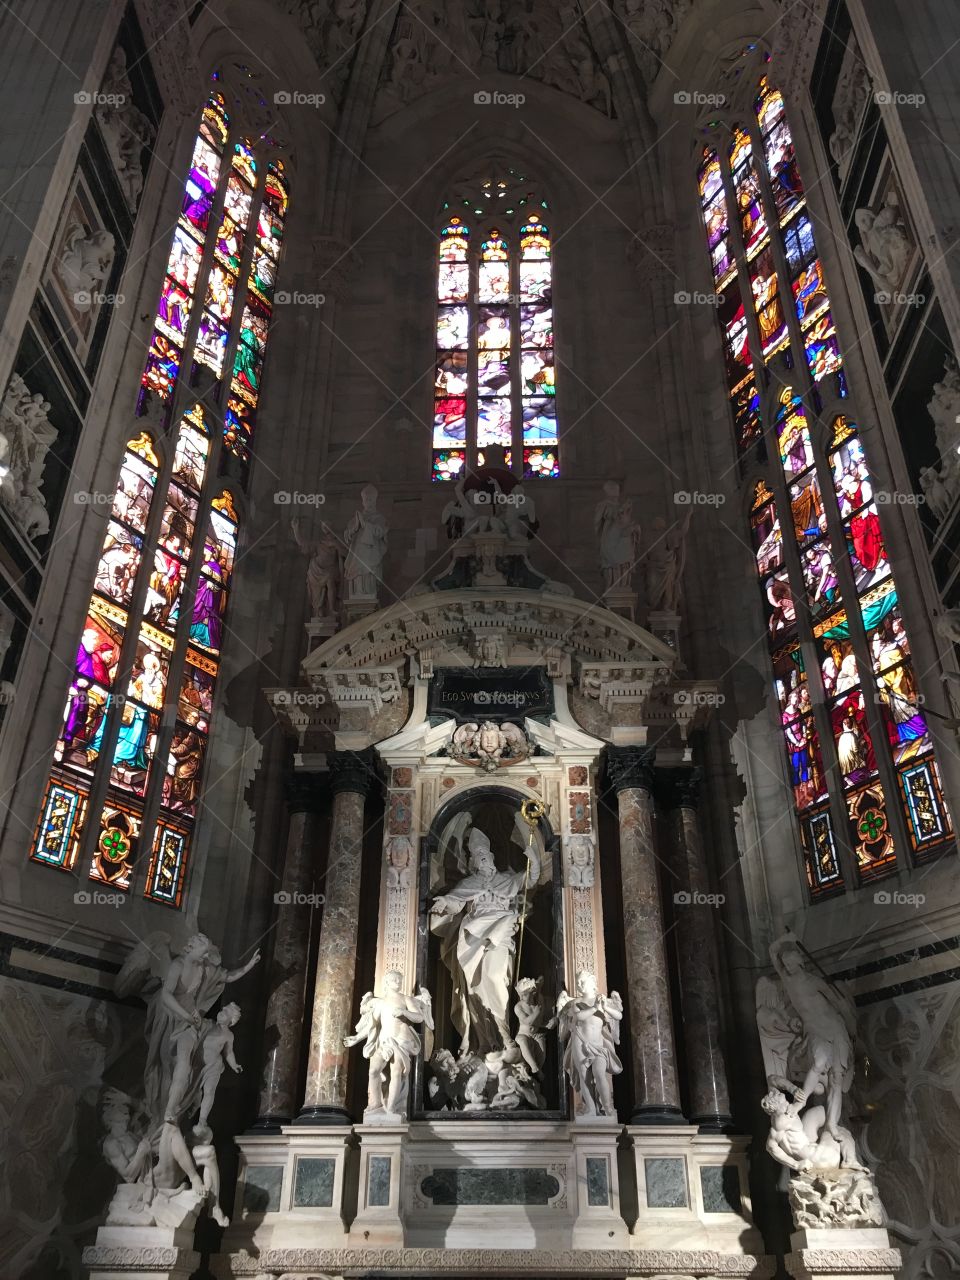 Stained glass inside Duomo Milan Italy